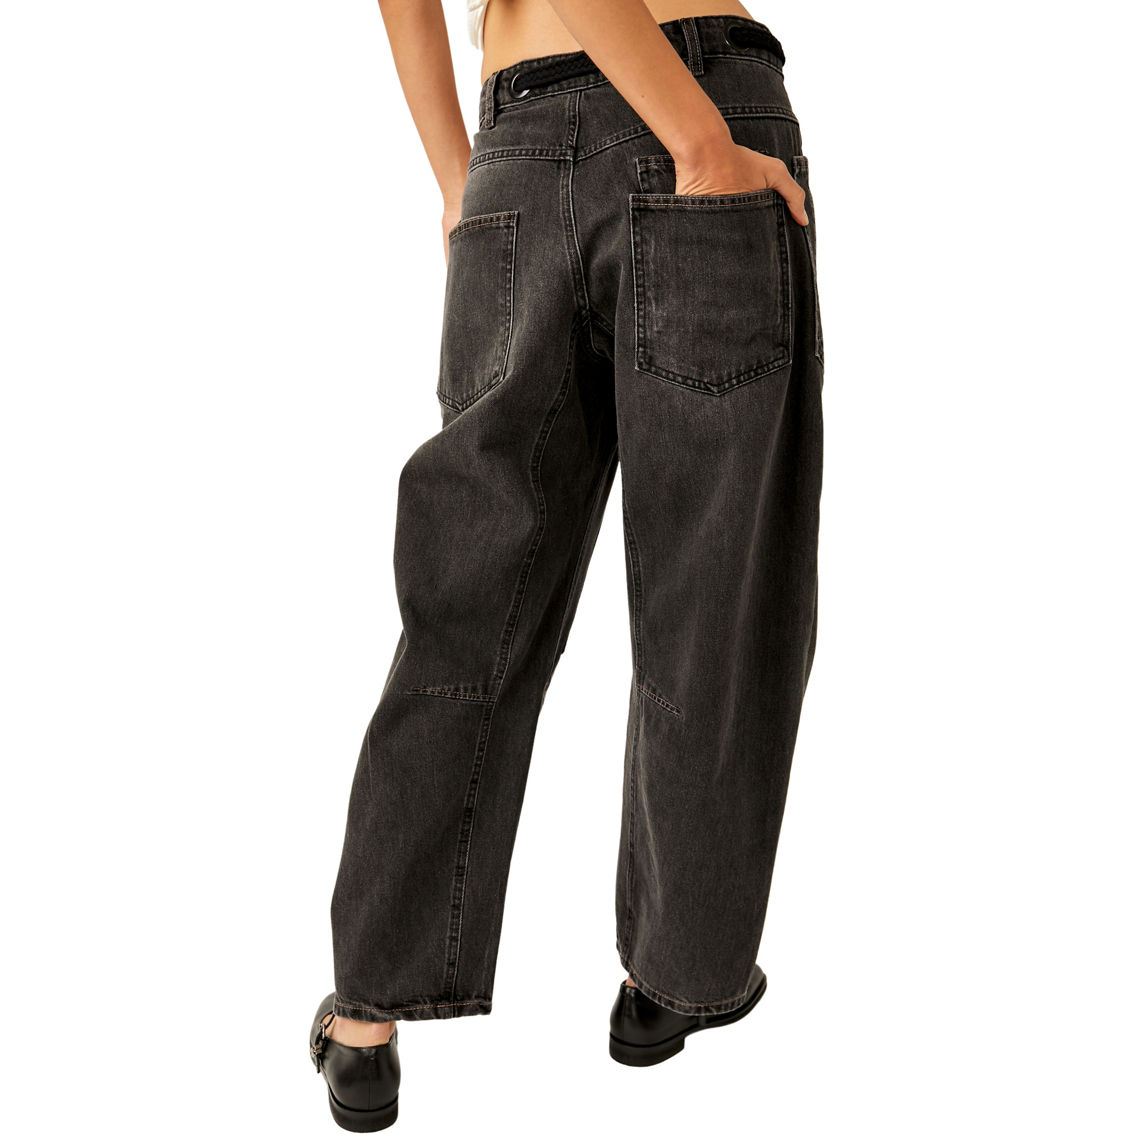 Free People Double Dutch Coated Pull On Jeans - Image 2 of 5